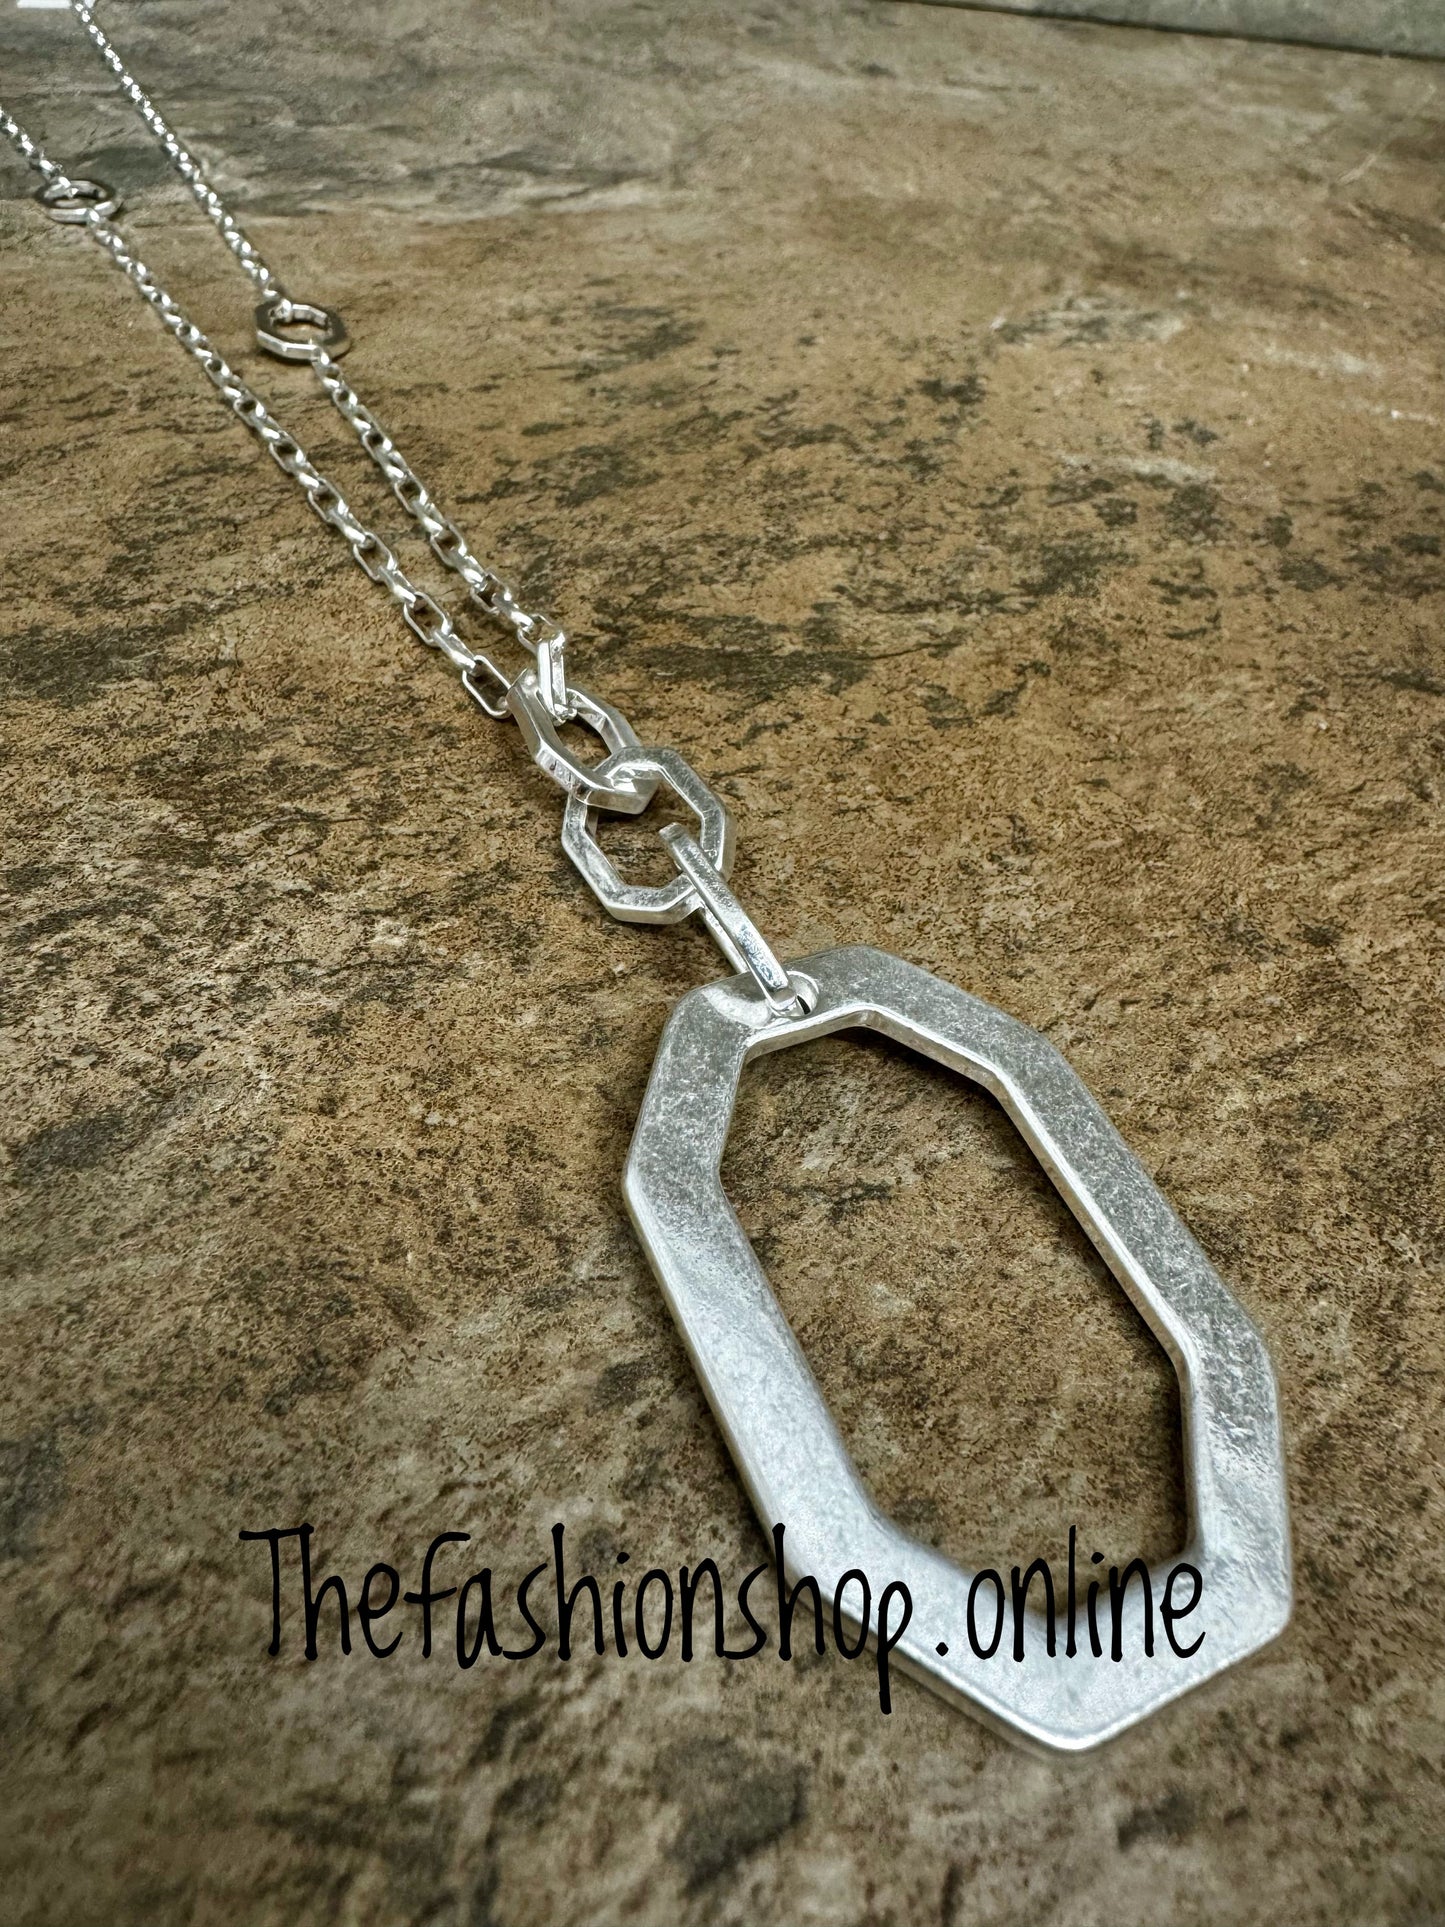 Envy long silver links necklace